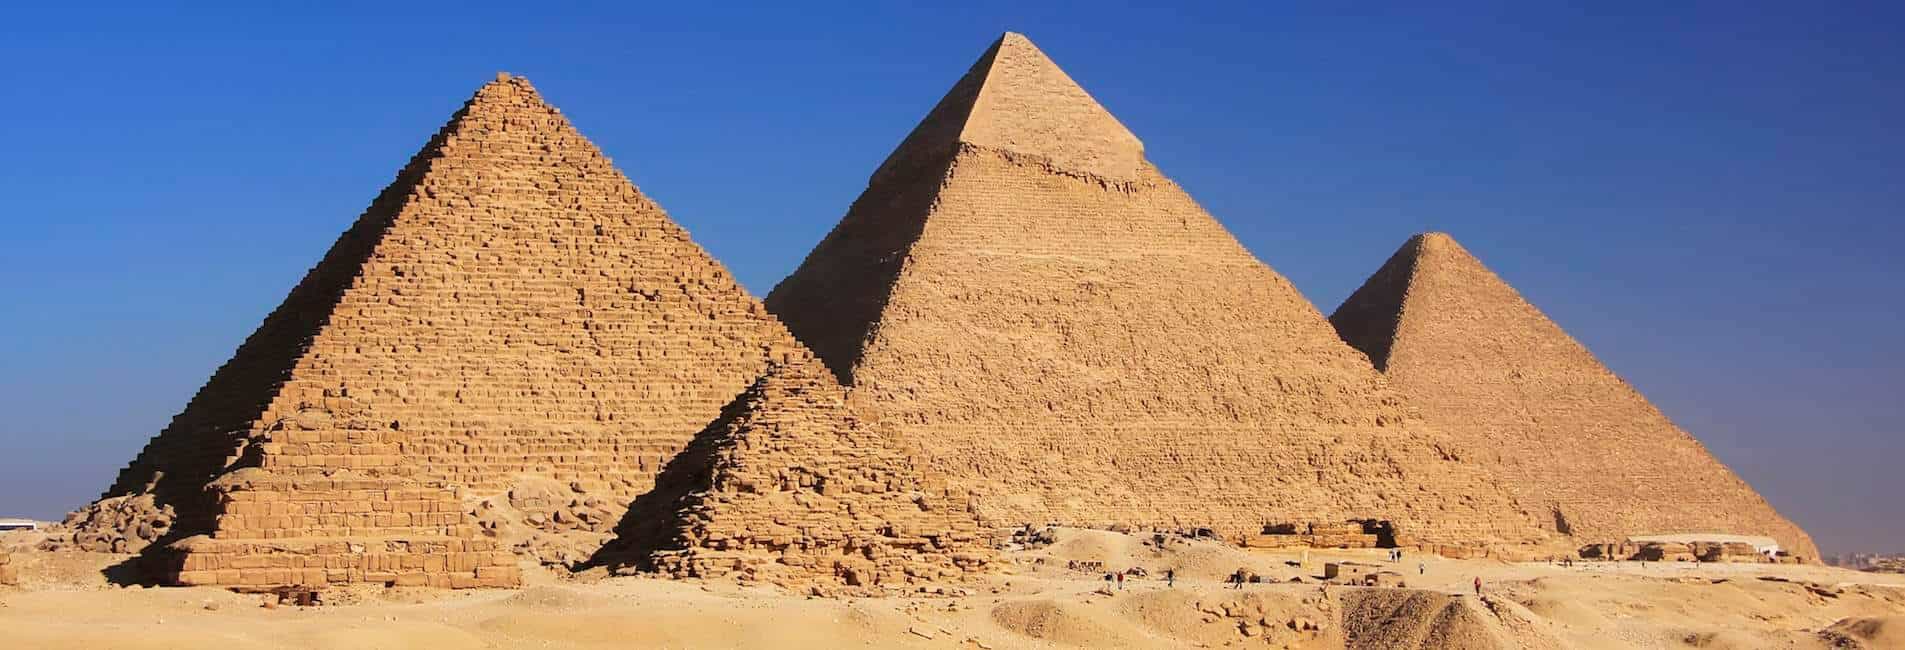 A private tour to The Great Pyramids of Giza is a must when planning your dream trip to Egypt